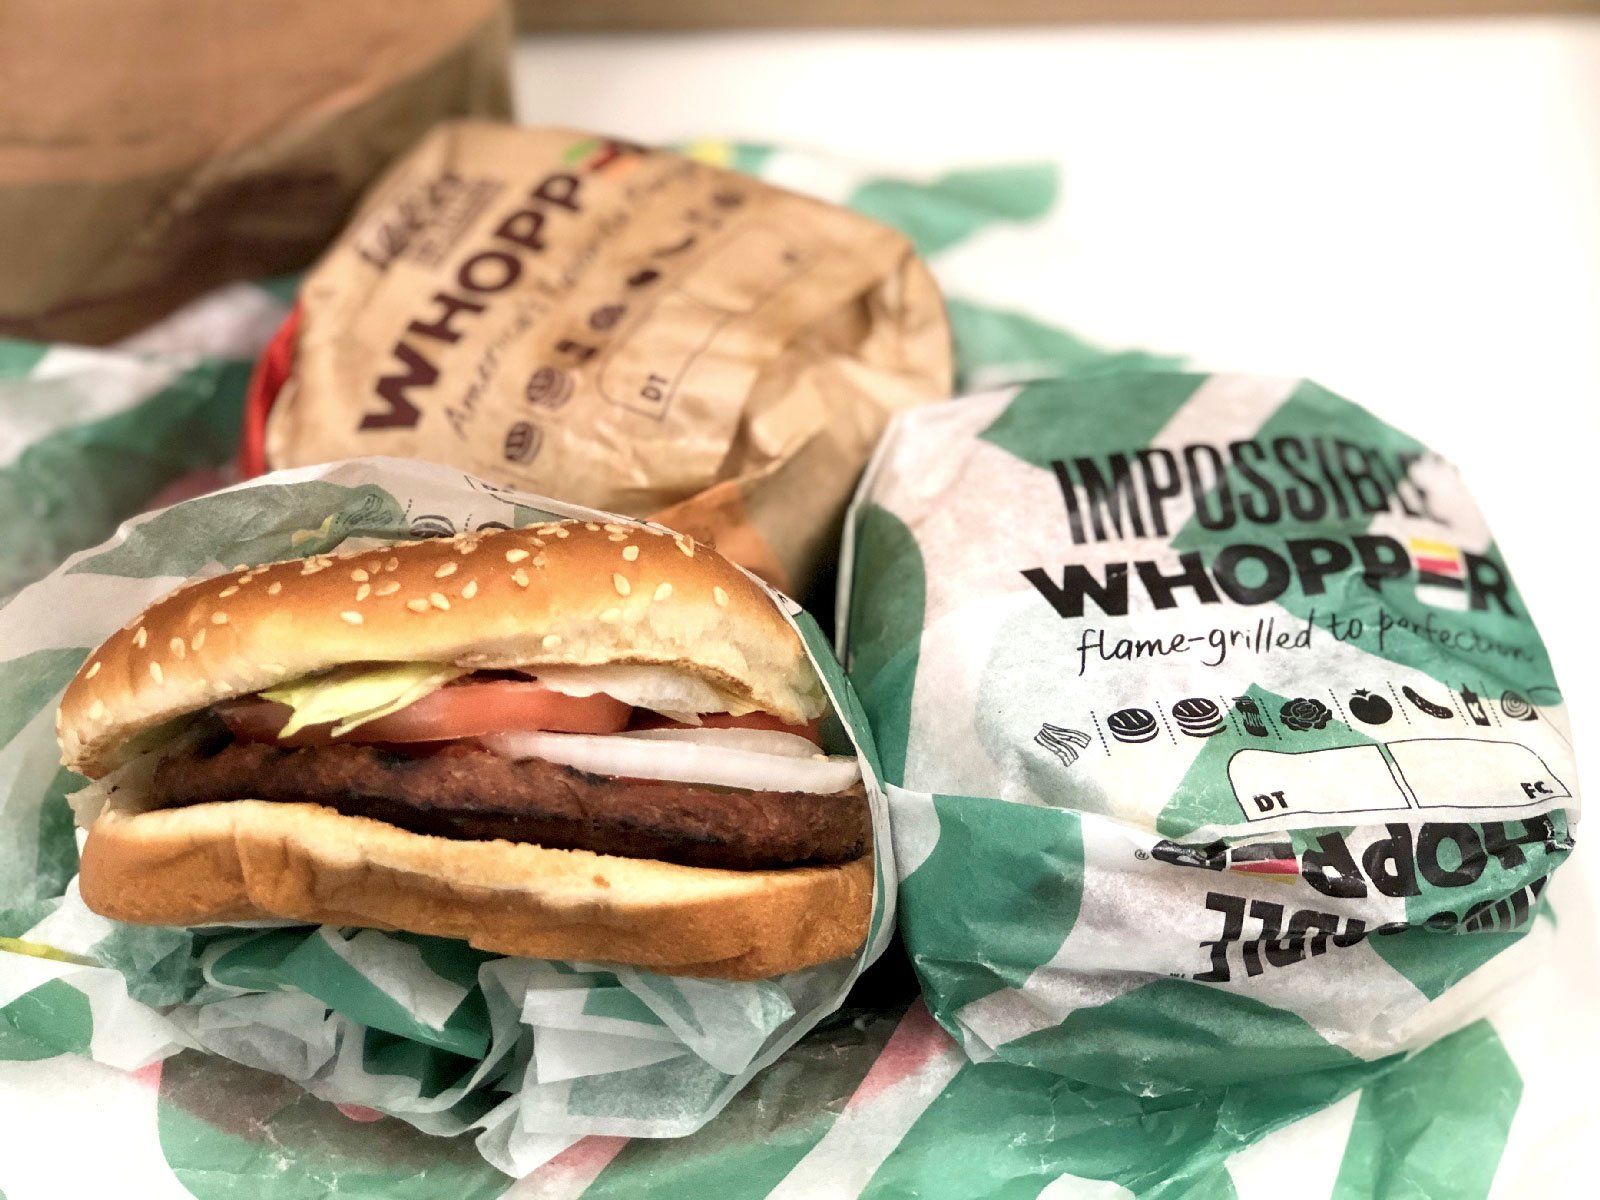 We Pared The Impossible Whopper To An All Beef